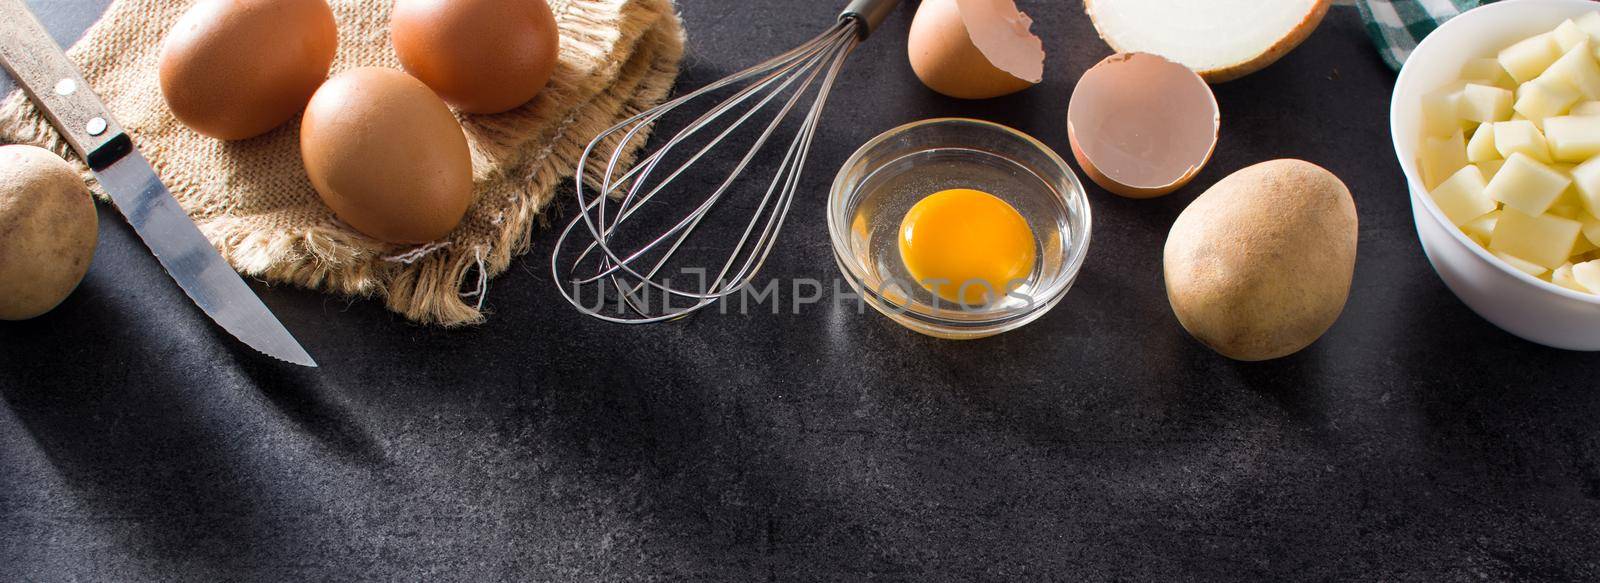 Spanish omelette tortilla ingredients: eggs, potatoes and onion on black slate background. Top view copy space